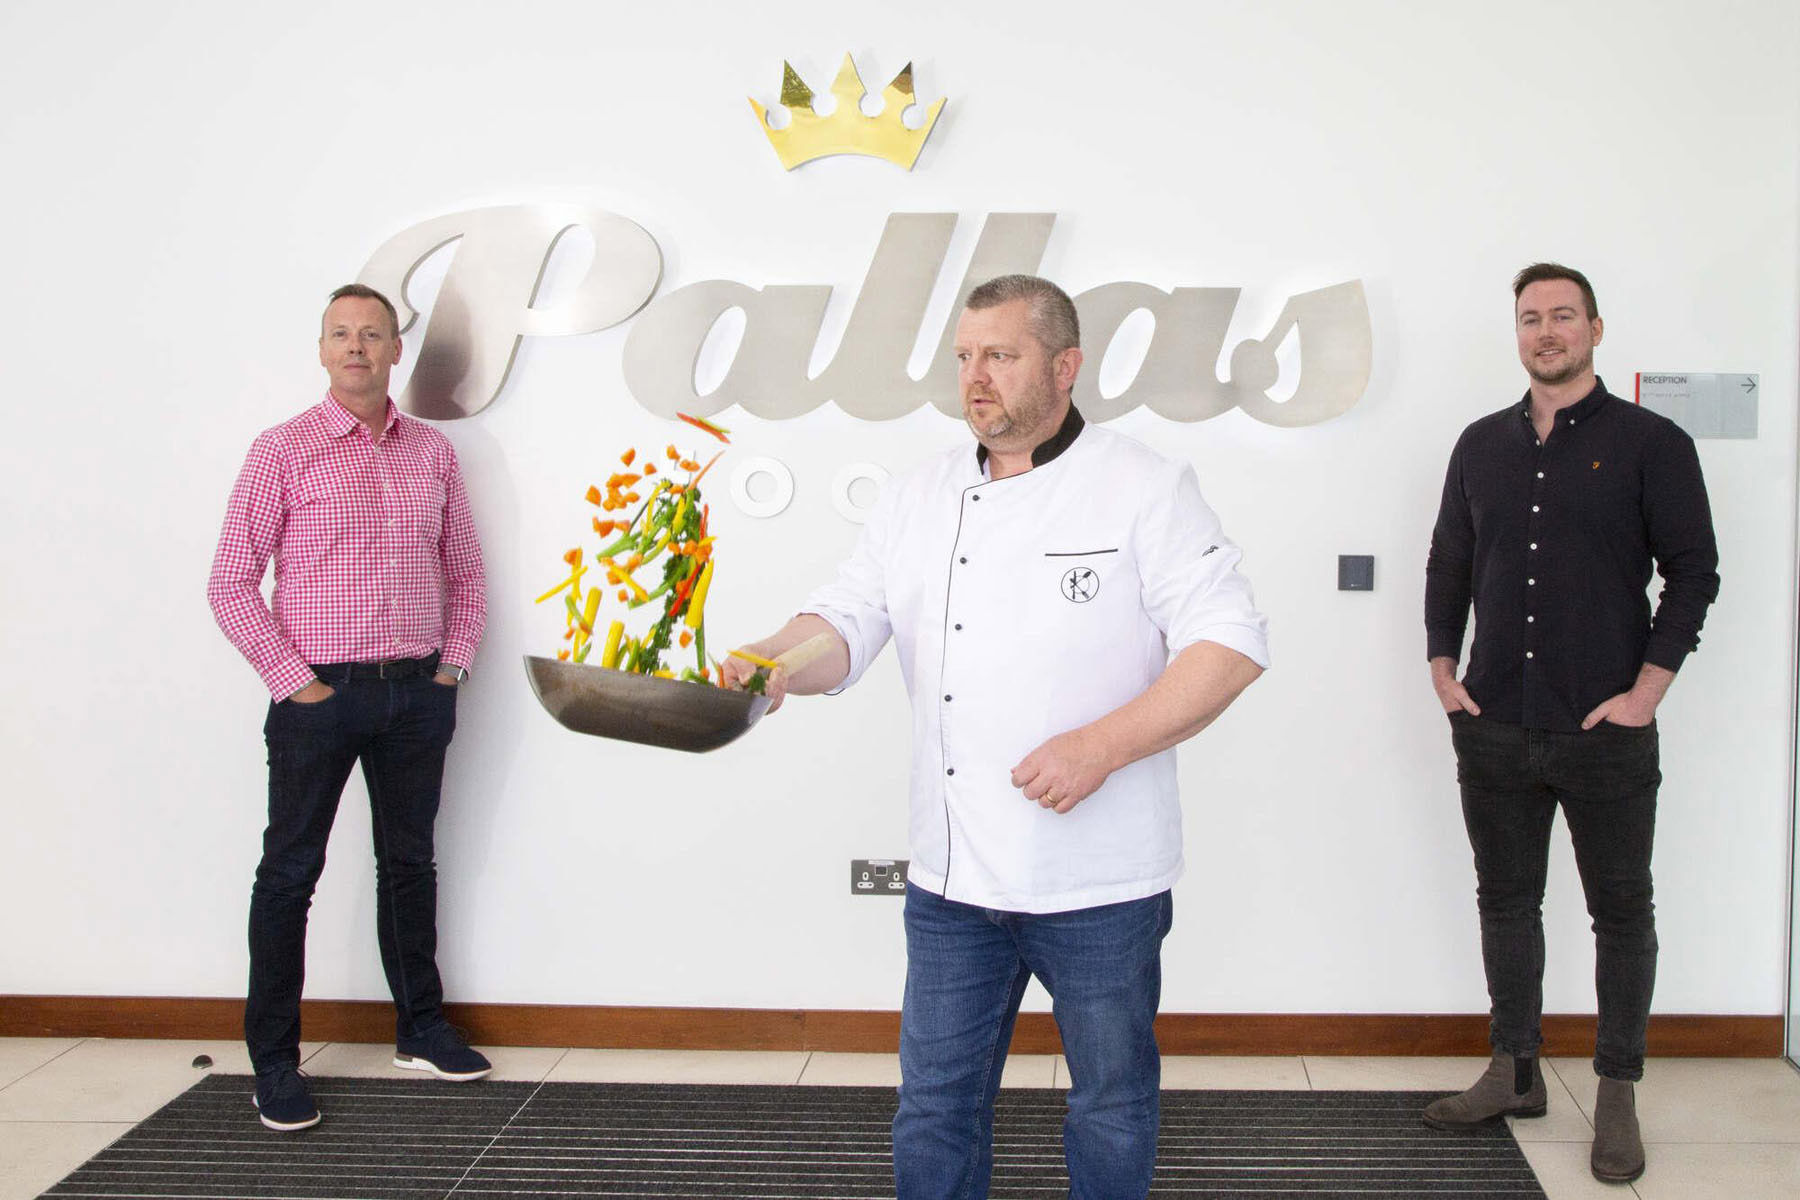 Flipdish partners with Pallas Foods to bring online ordering to their customers